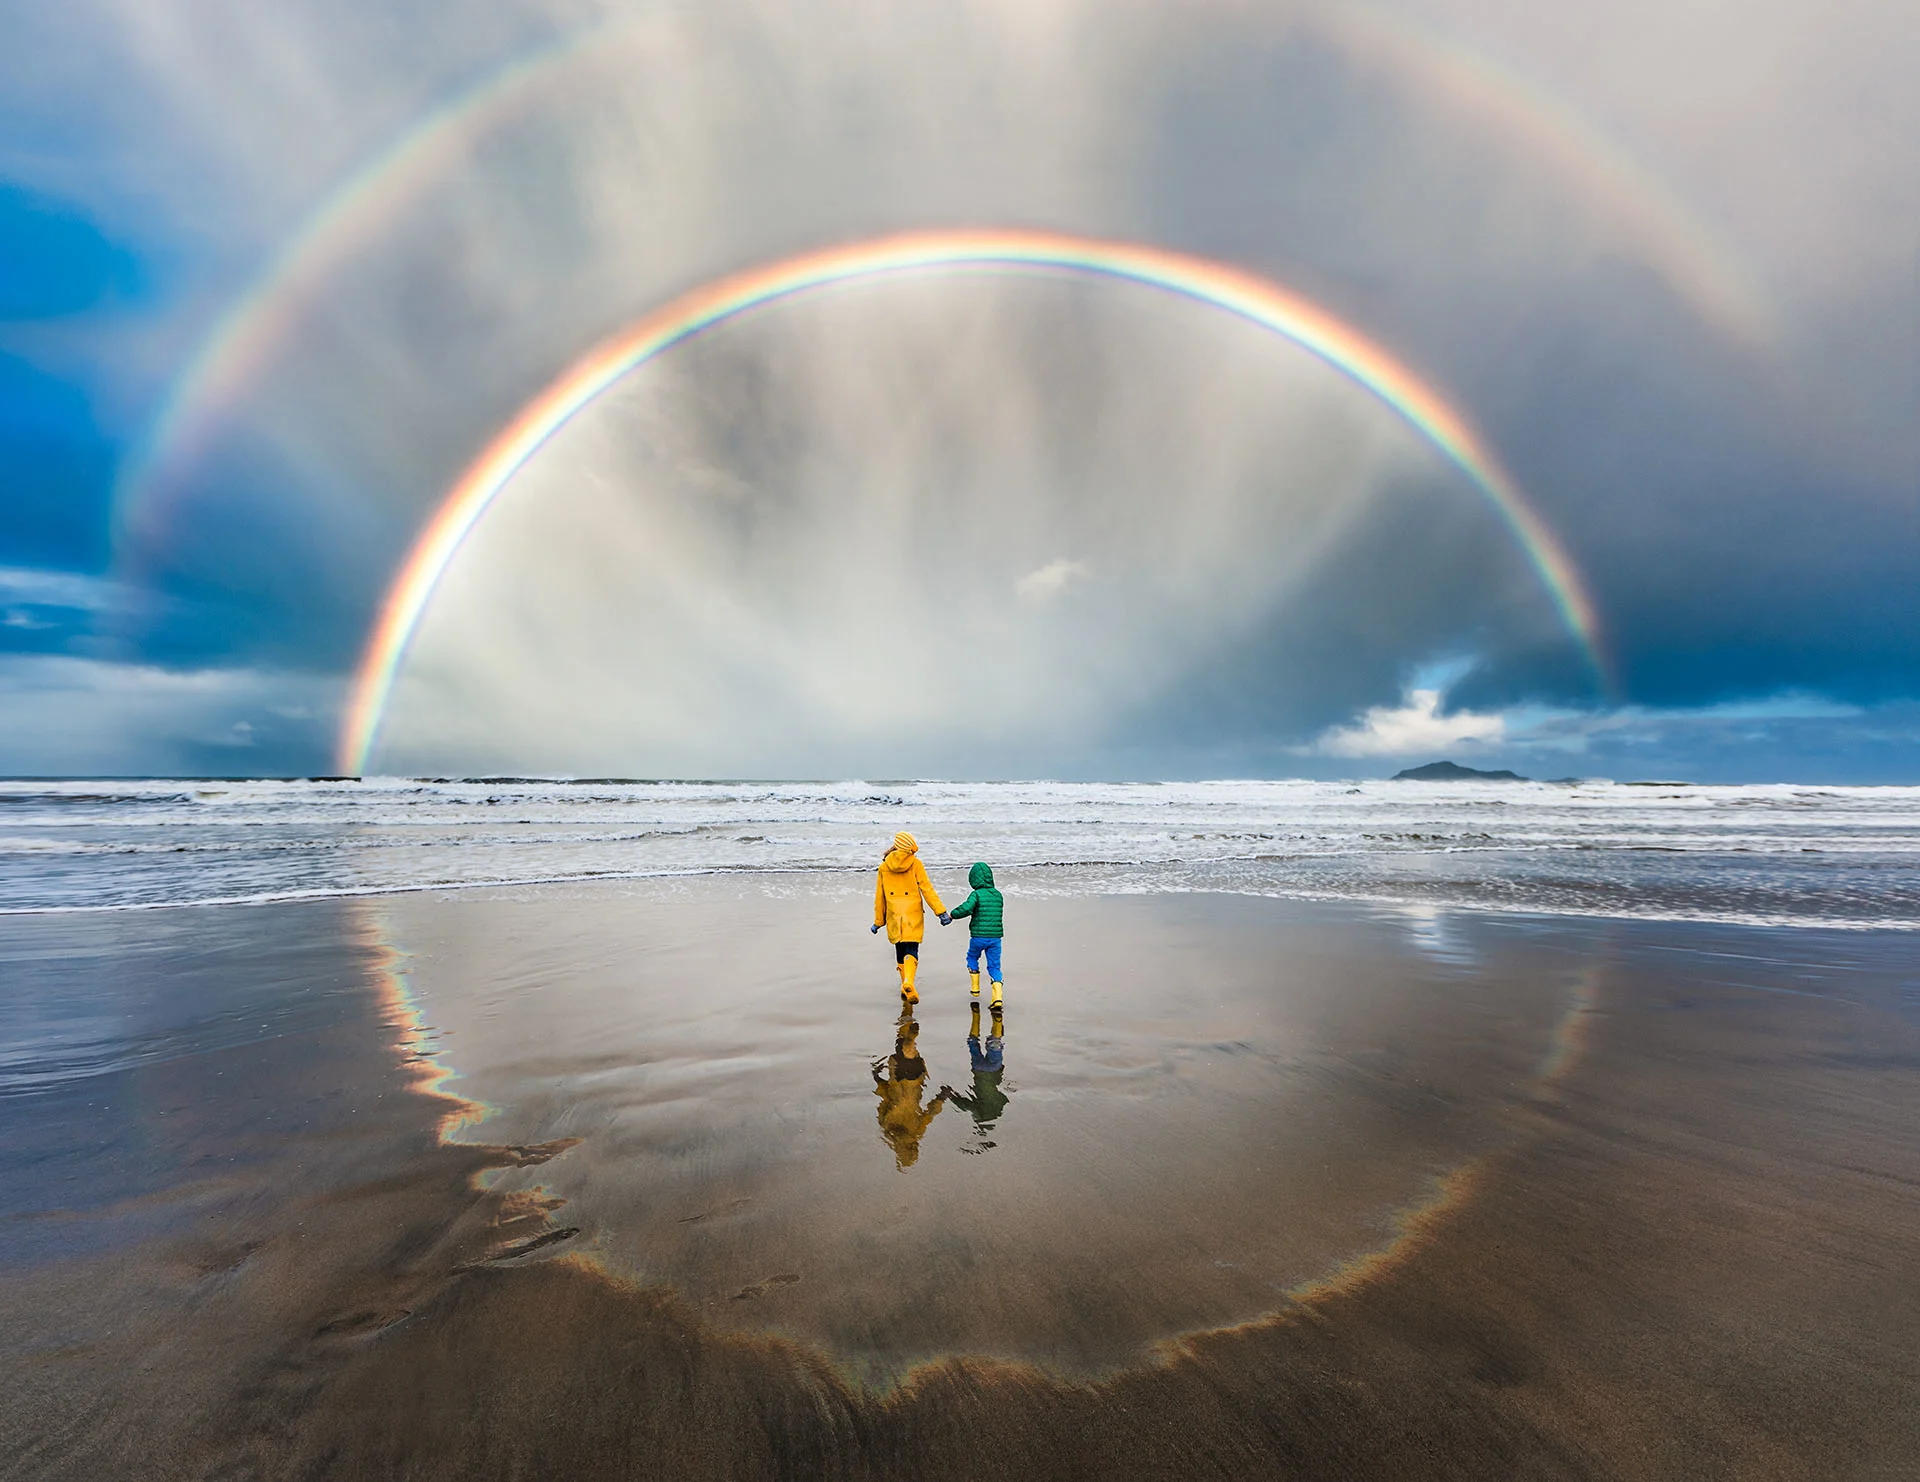 Rainbow reflecting on wet beach with children in the middle